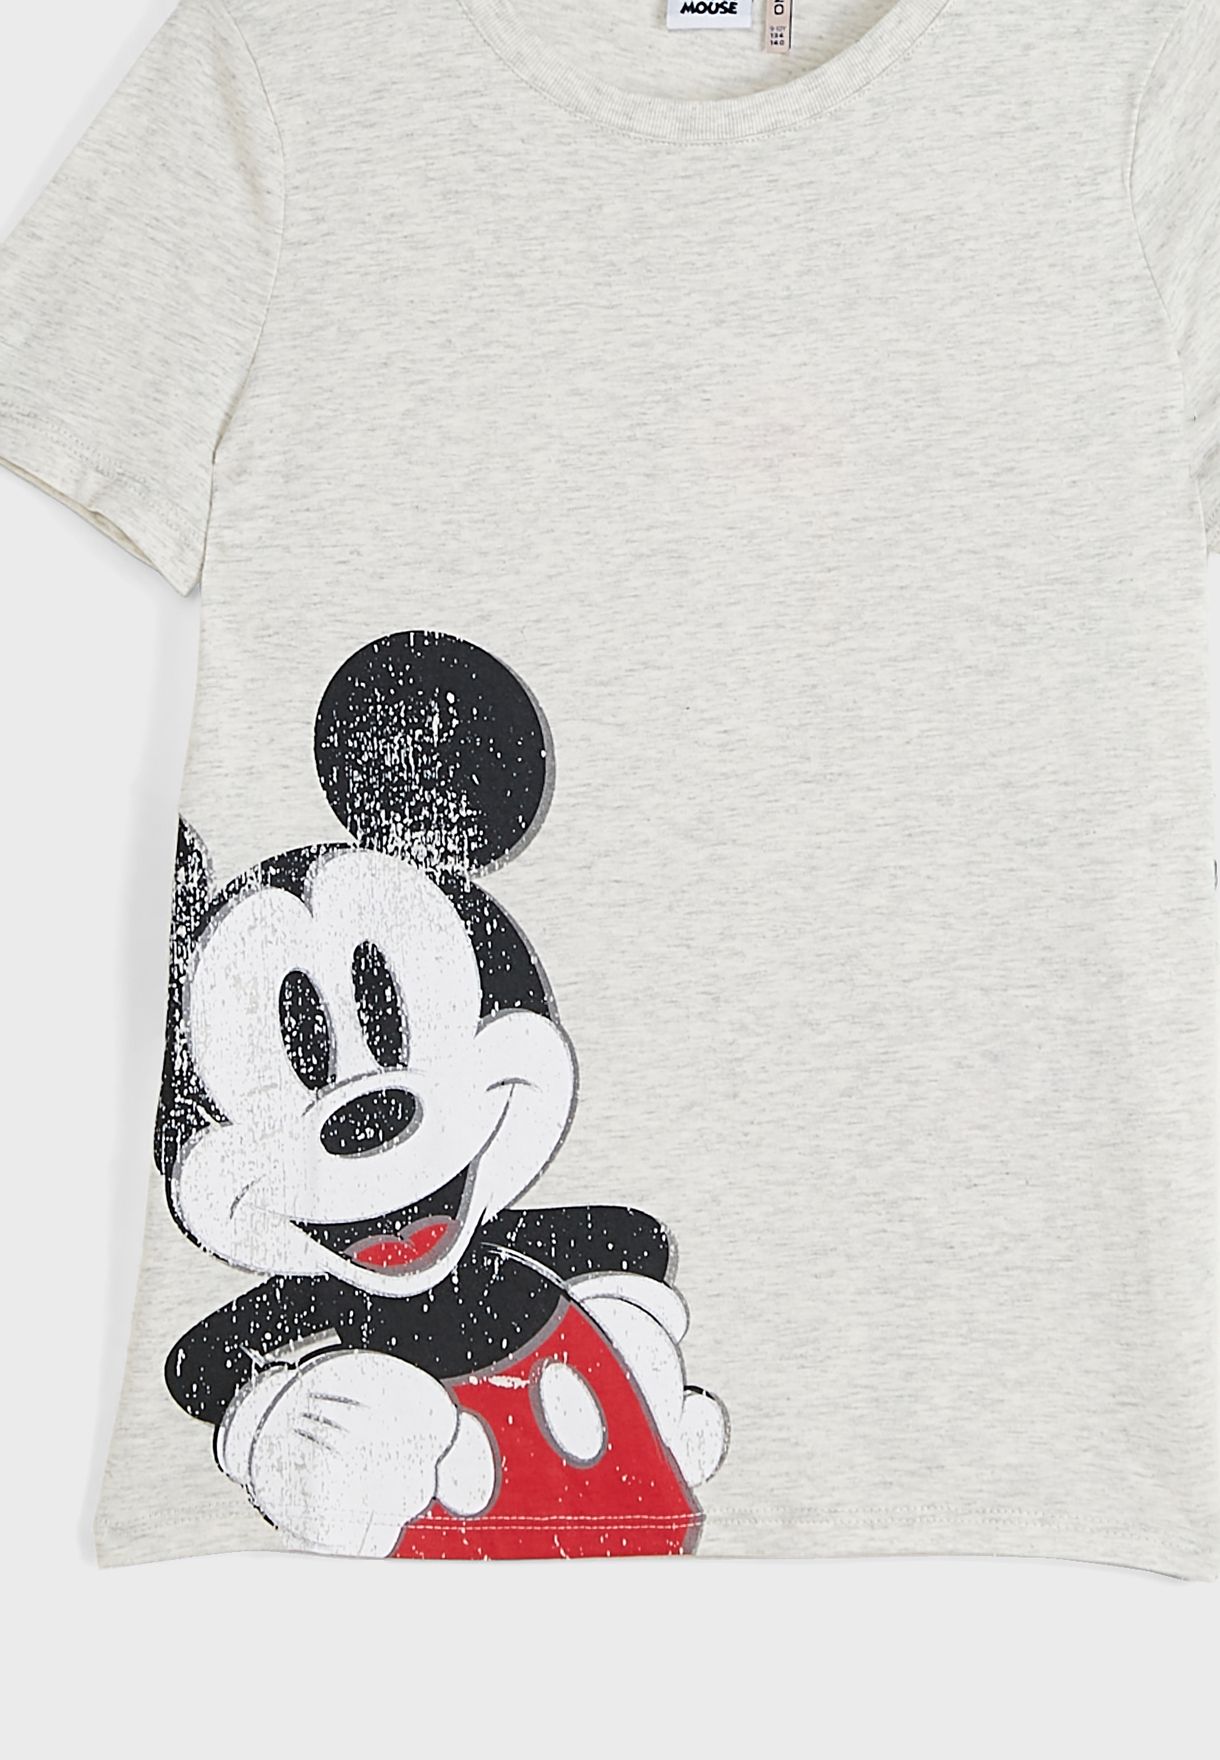 Kids Mickey Mouse T-Shirt